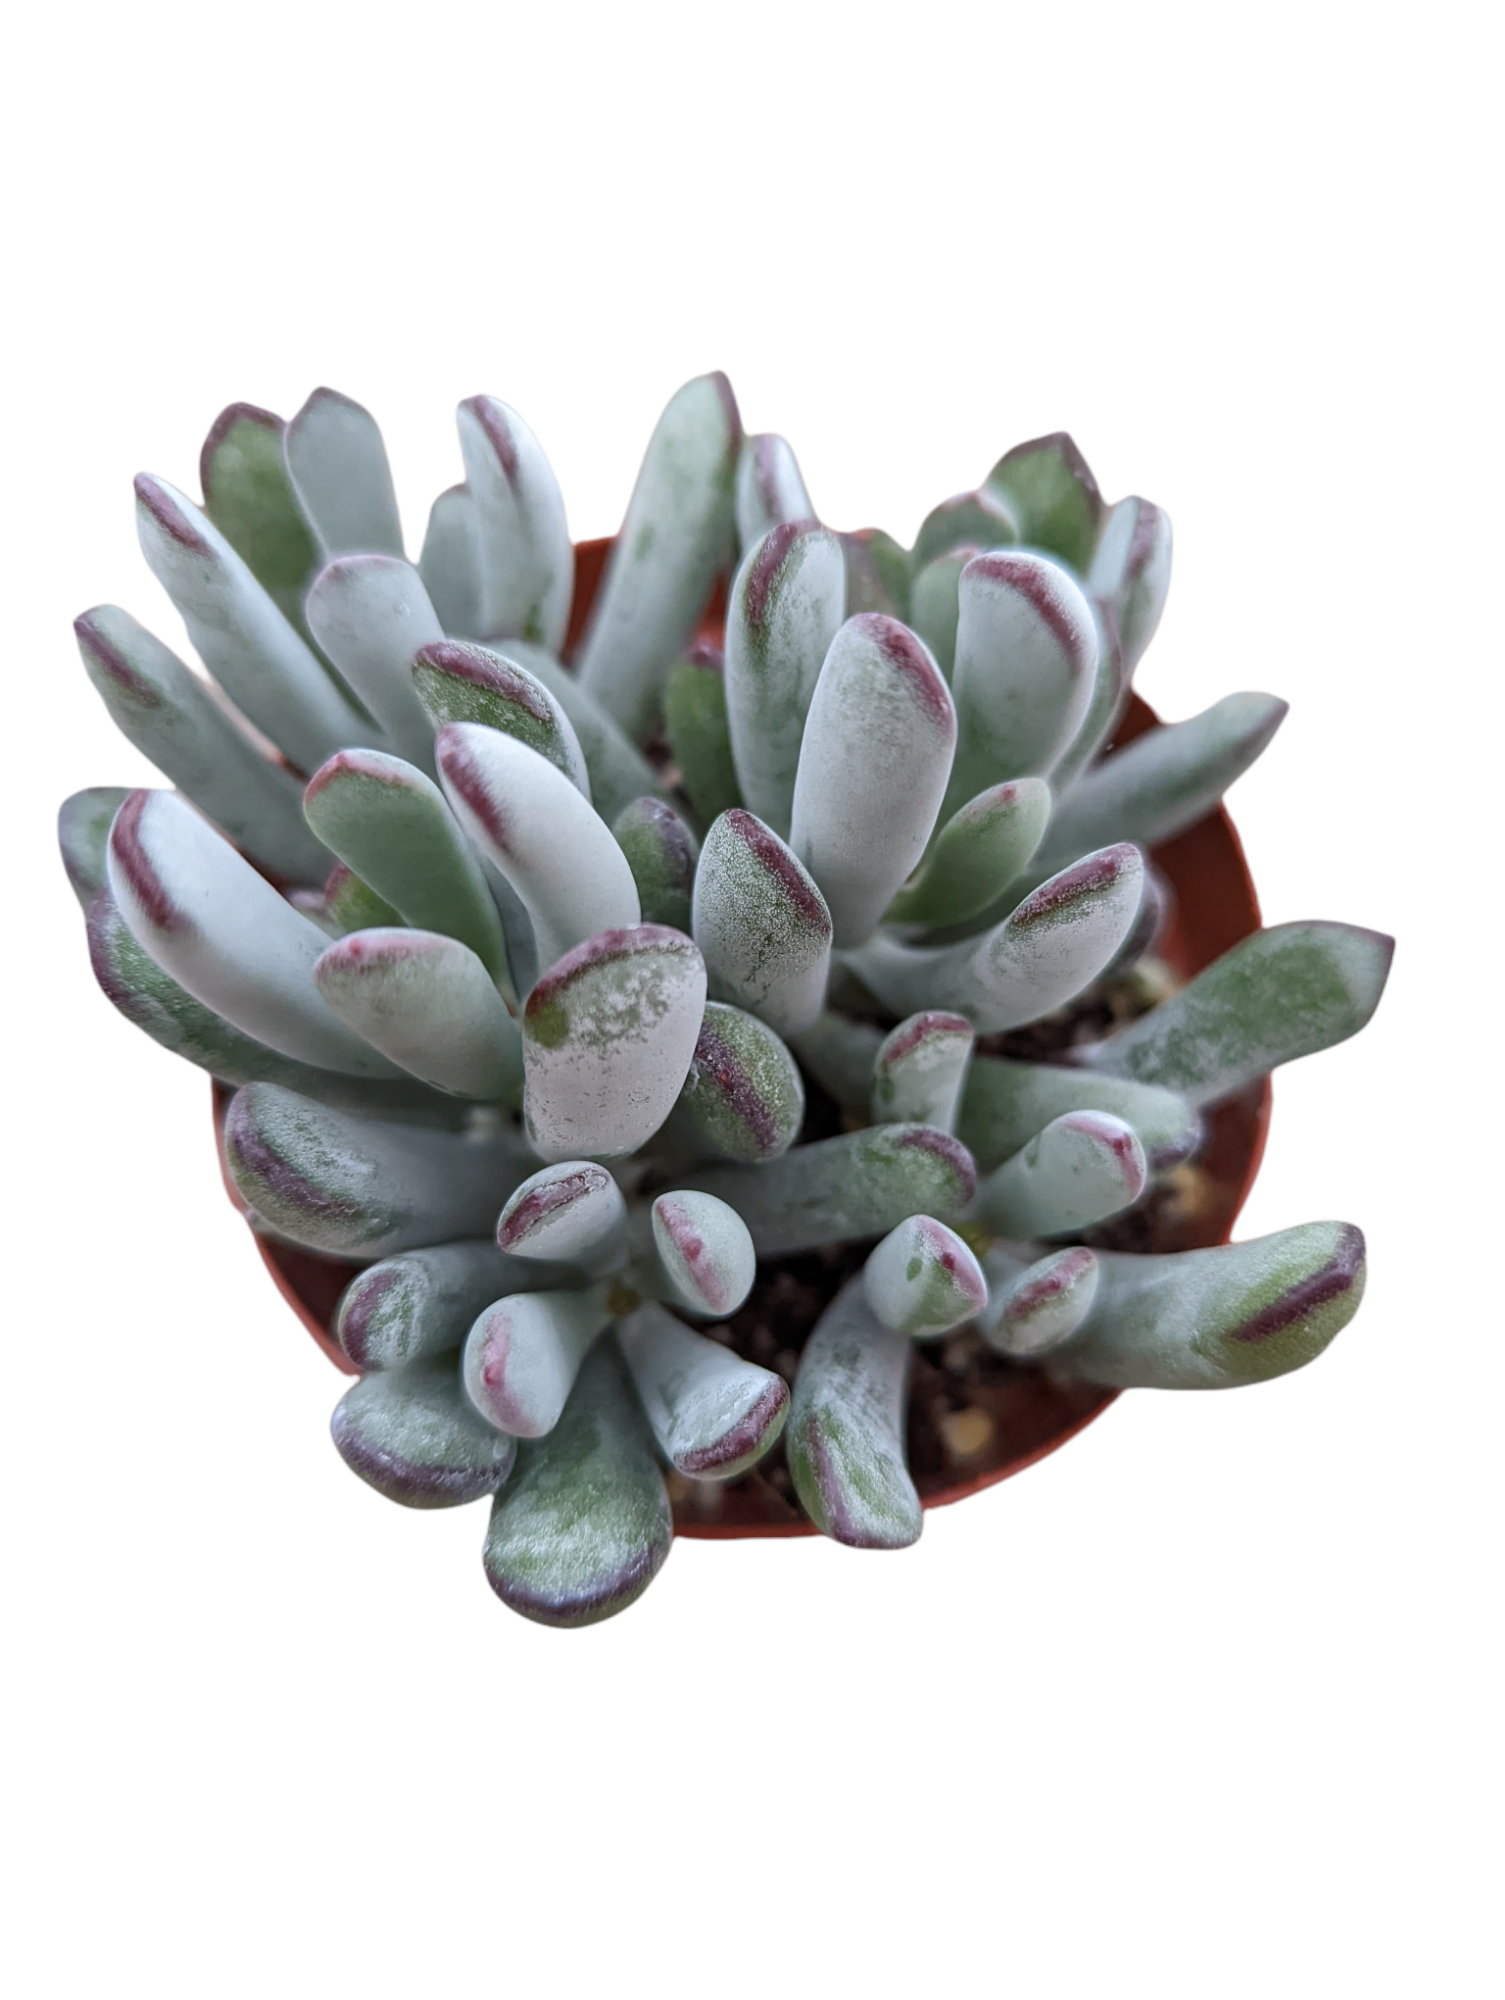 Cotyledon orbiculata 'Happy Young Lady'